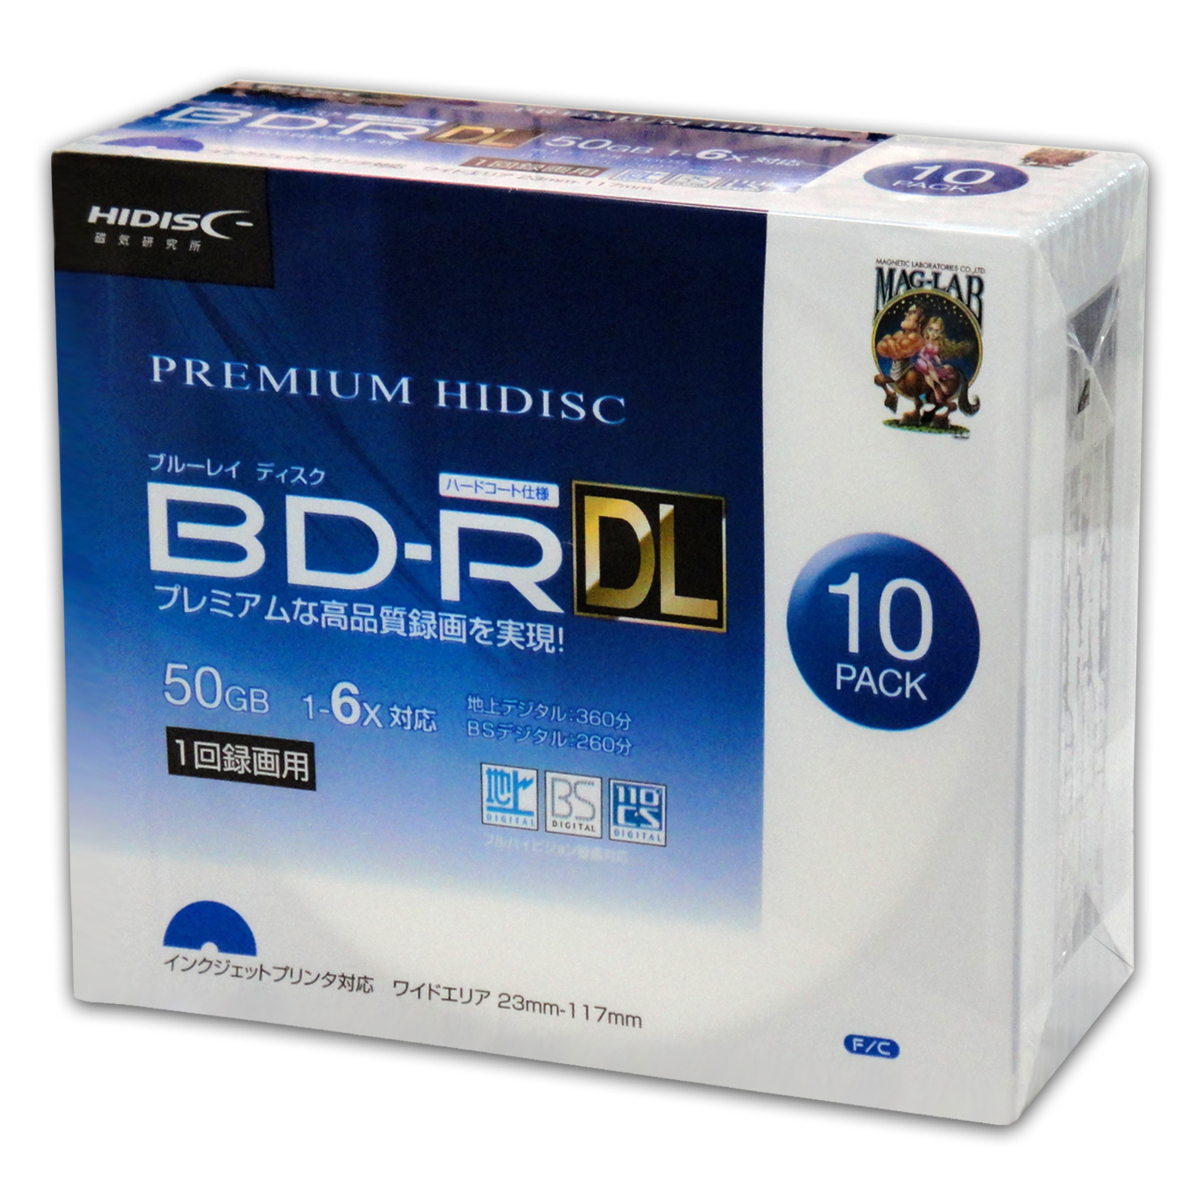  including in a package possibility BD-R DL video recording for Blue-ray 10 sheets pack 2 layer 50GB 6 speed slim in the case HIDISC HDVBR50RP10SC/0758x2 piece set /.